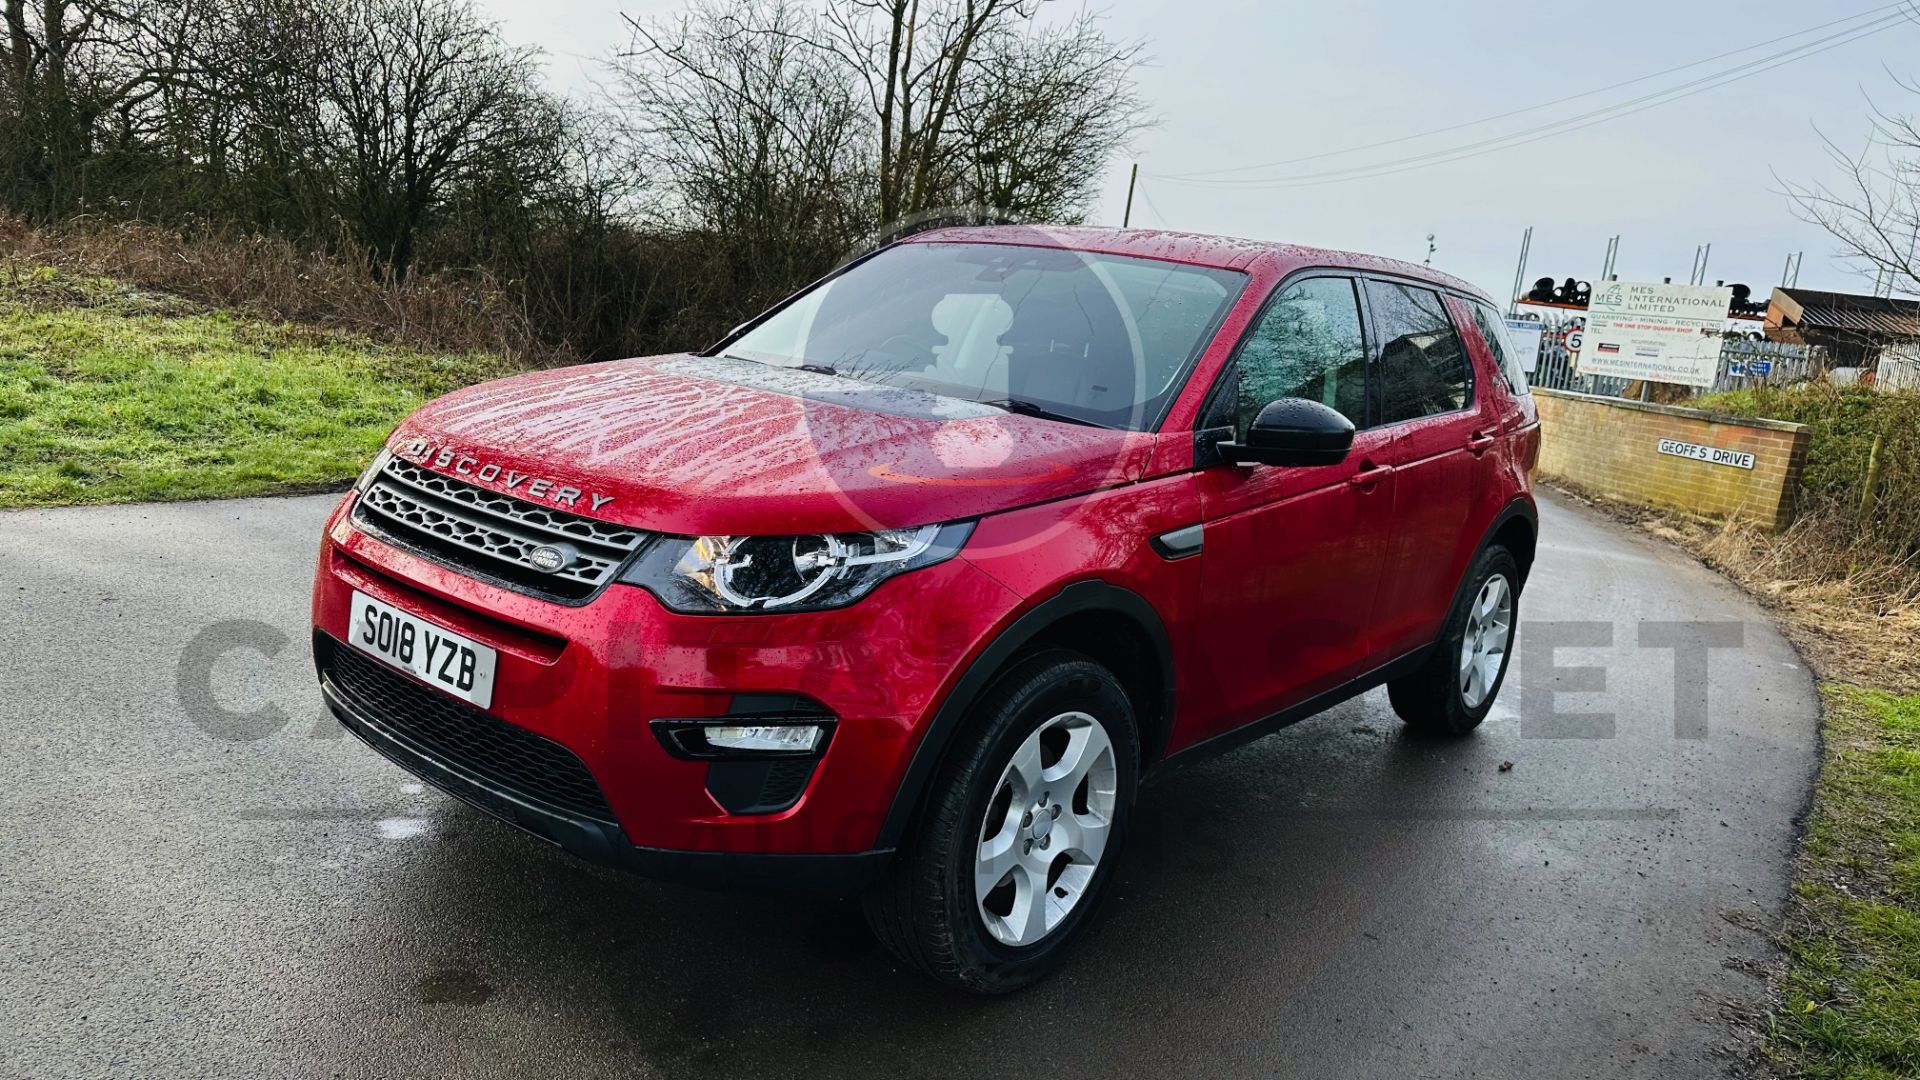 LAND ROVER DISCOVERY SPORT *PURE SPECIAL EDITION* SUV (2018 - EURO 6) 2.0 TD4 - AUTO STOP/START - Image 5 of 48